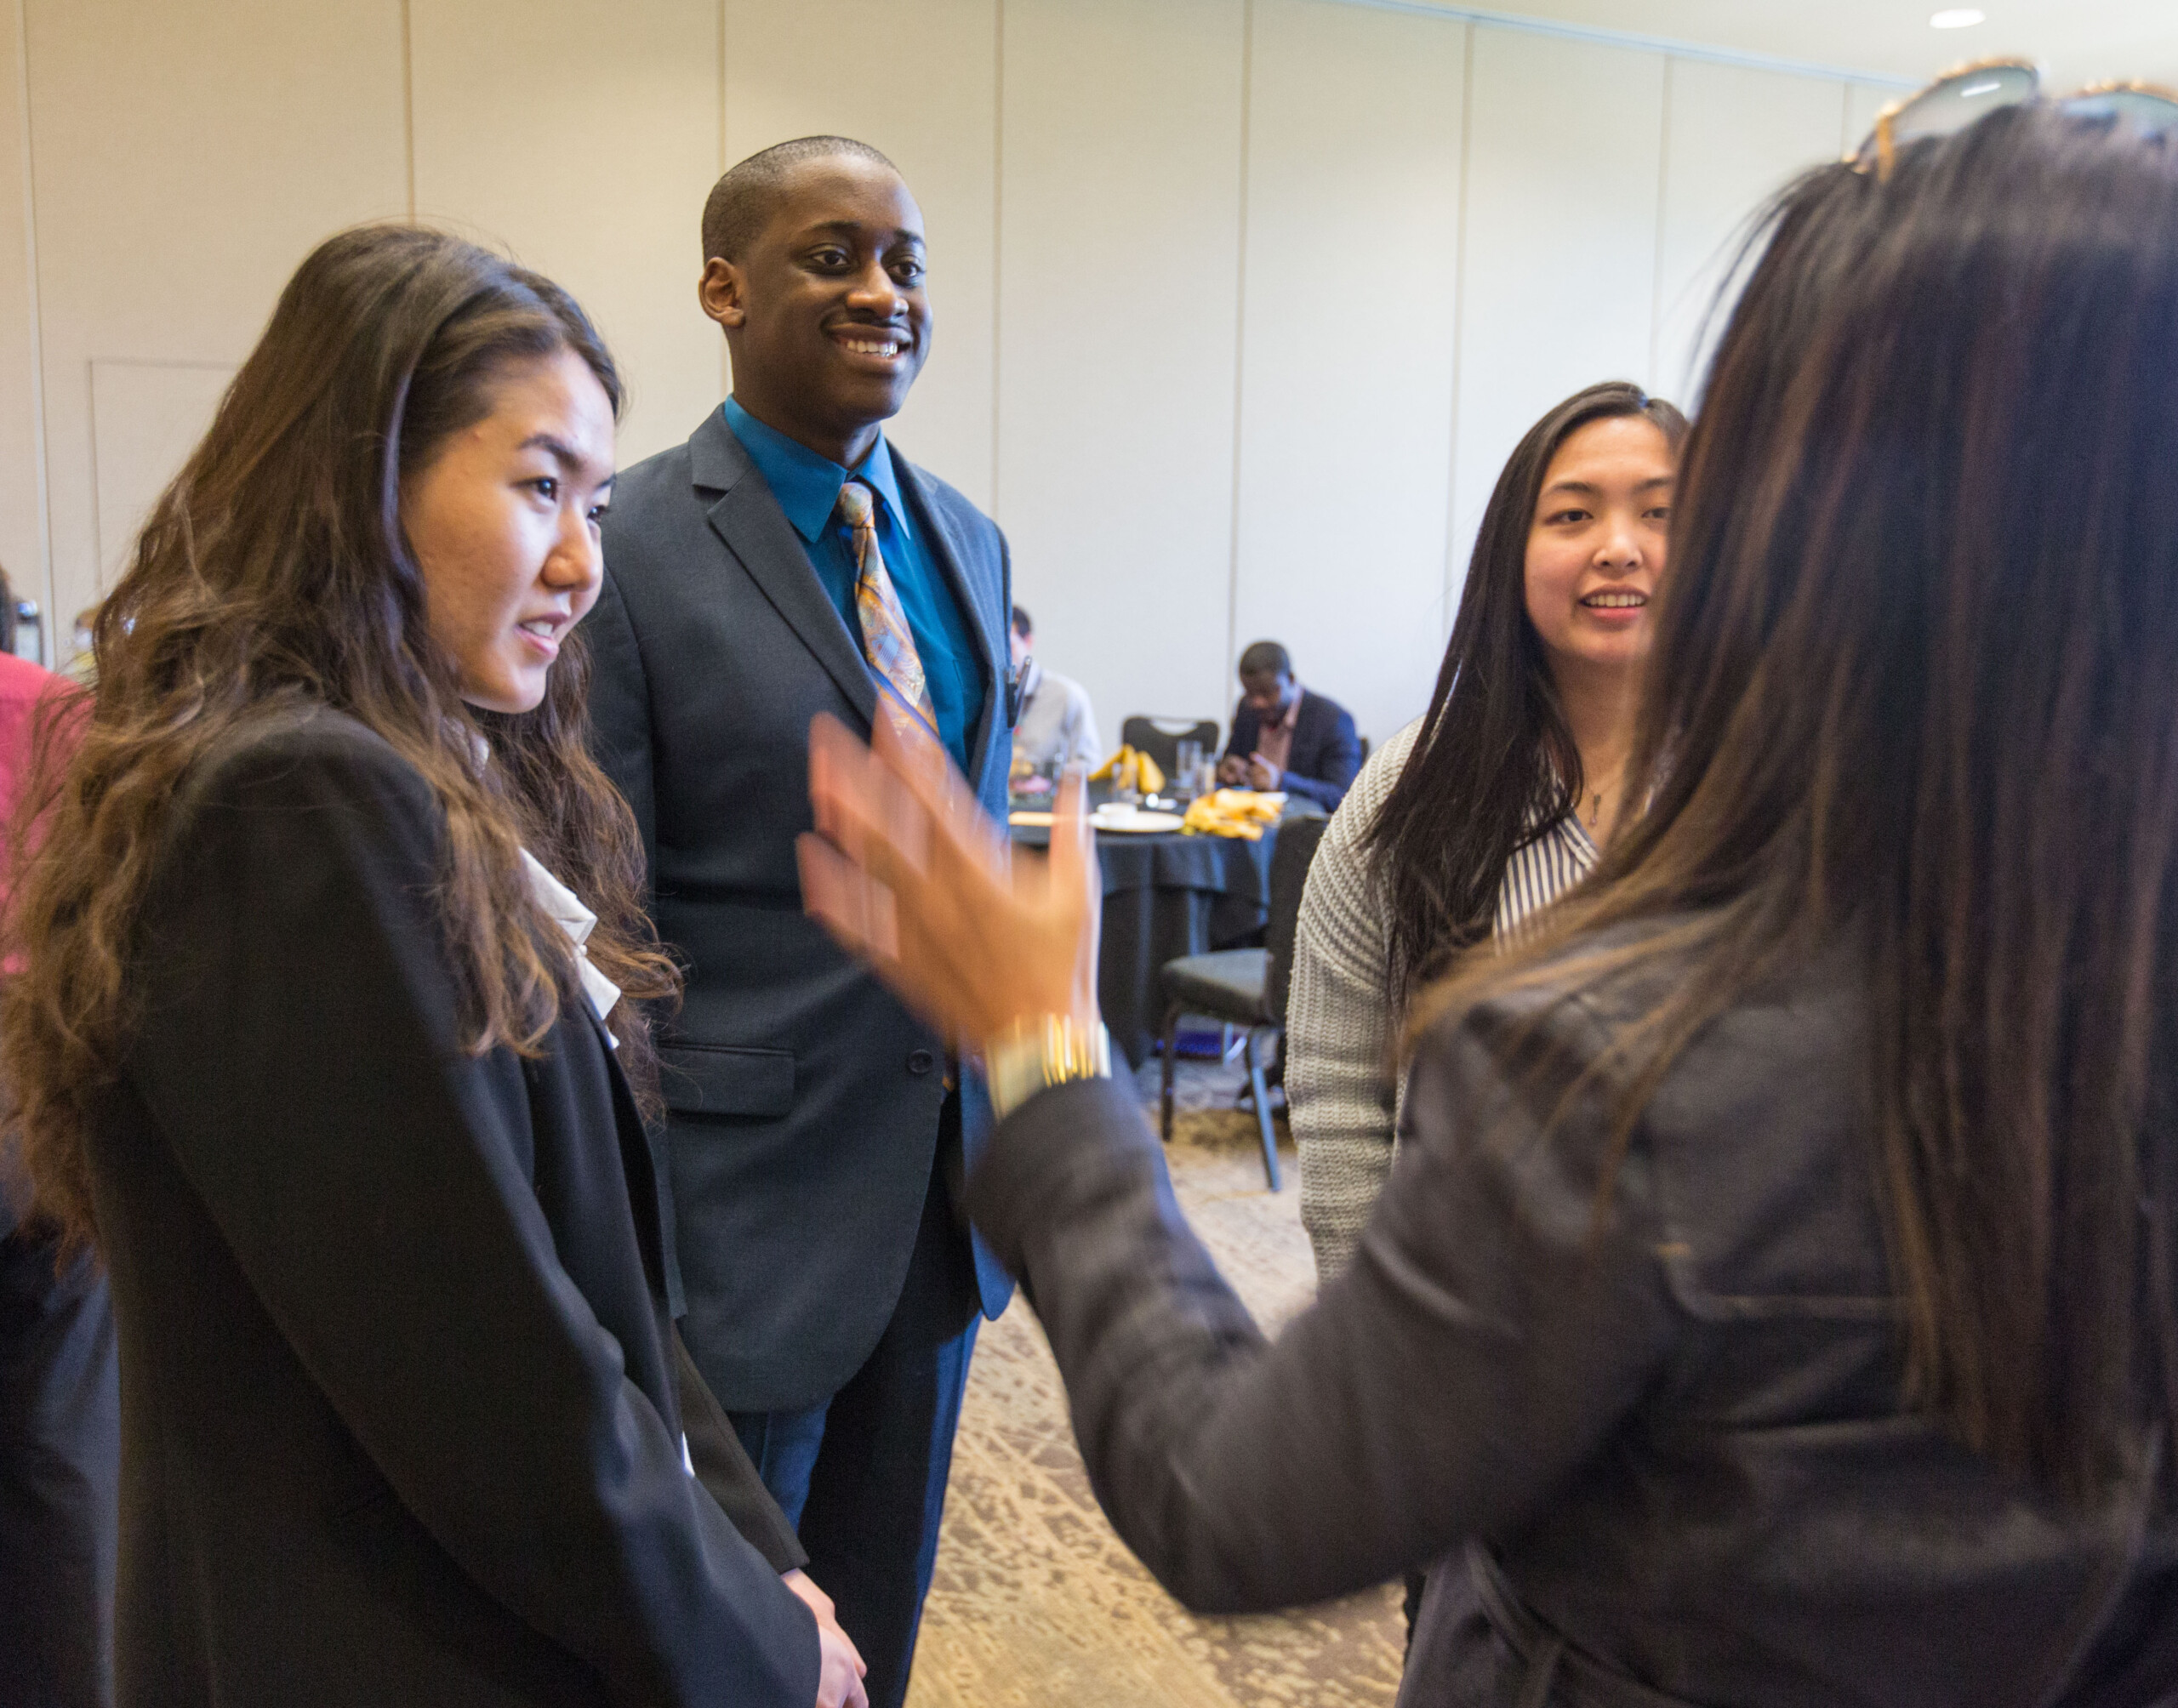 Visit to Alaska Air for students to connect with alumni who work there for career advice, Thursday, March 28, 2019. (Photo/John Froschauer)